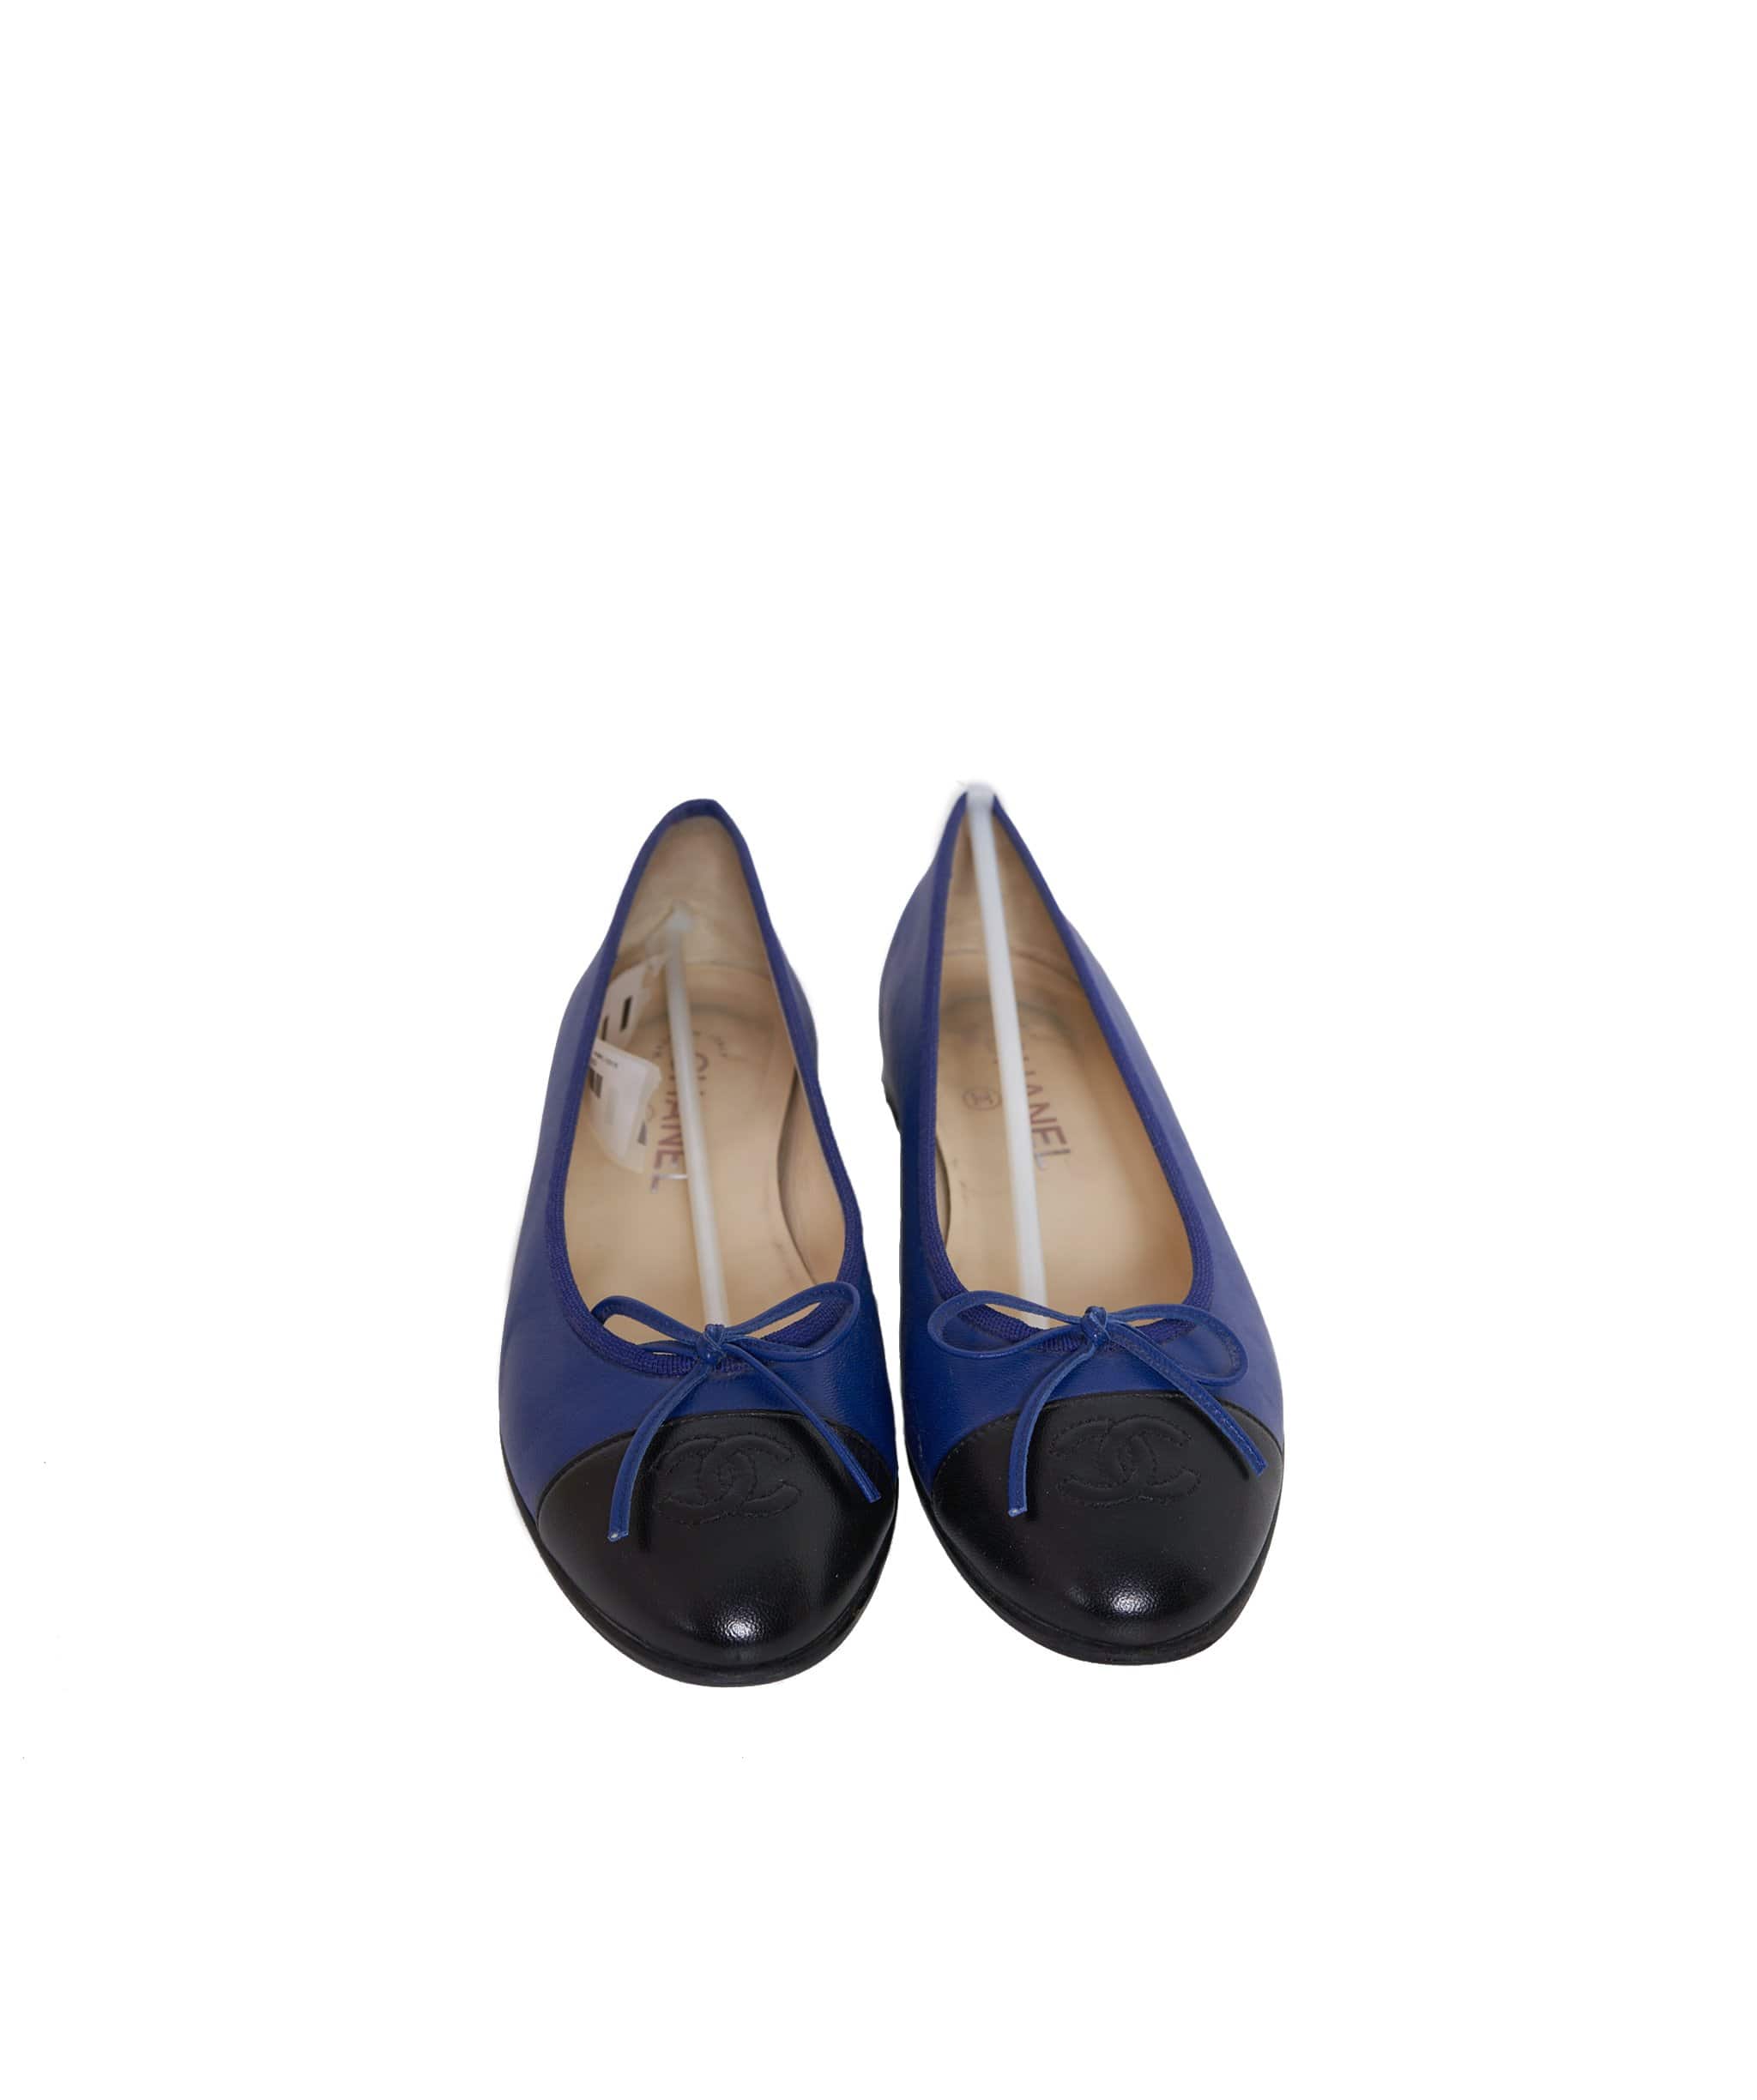 Chanel Chanel Ballet Pumps size 38 - AWL1215